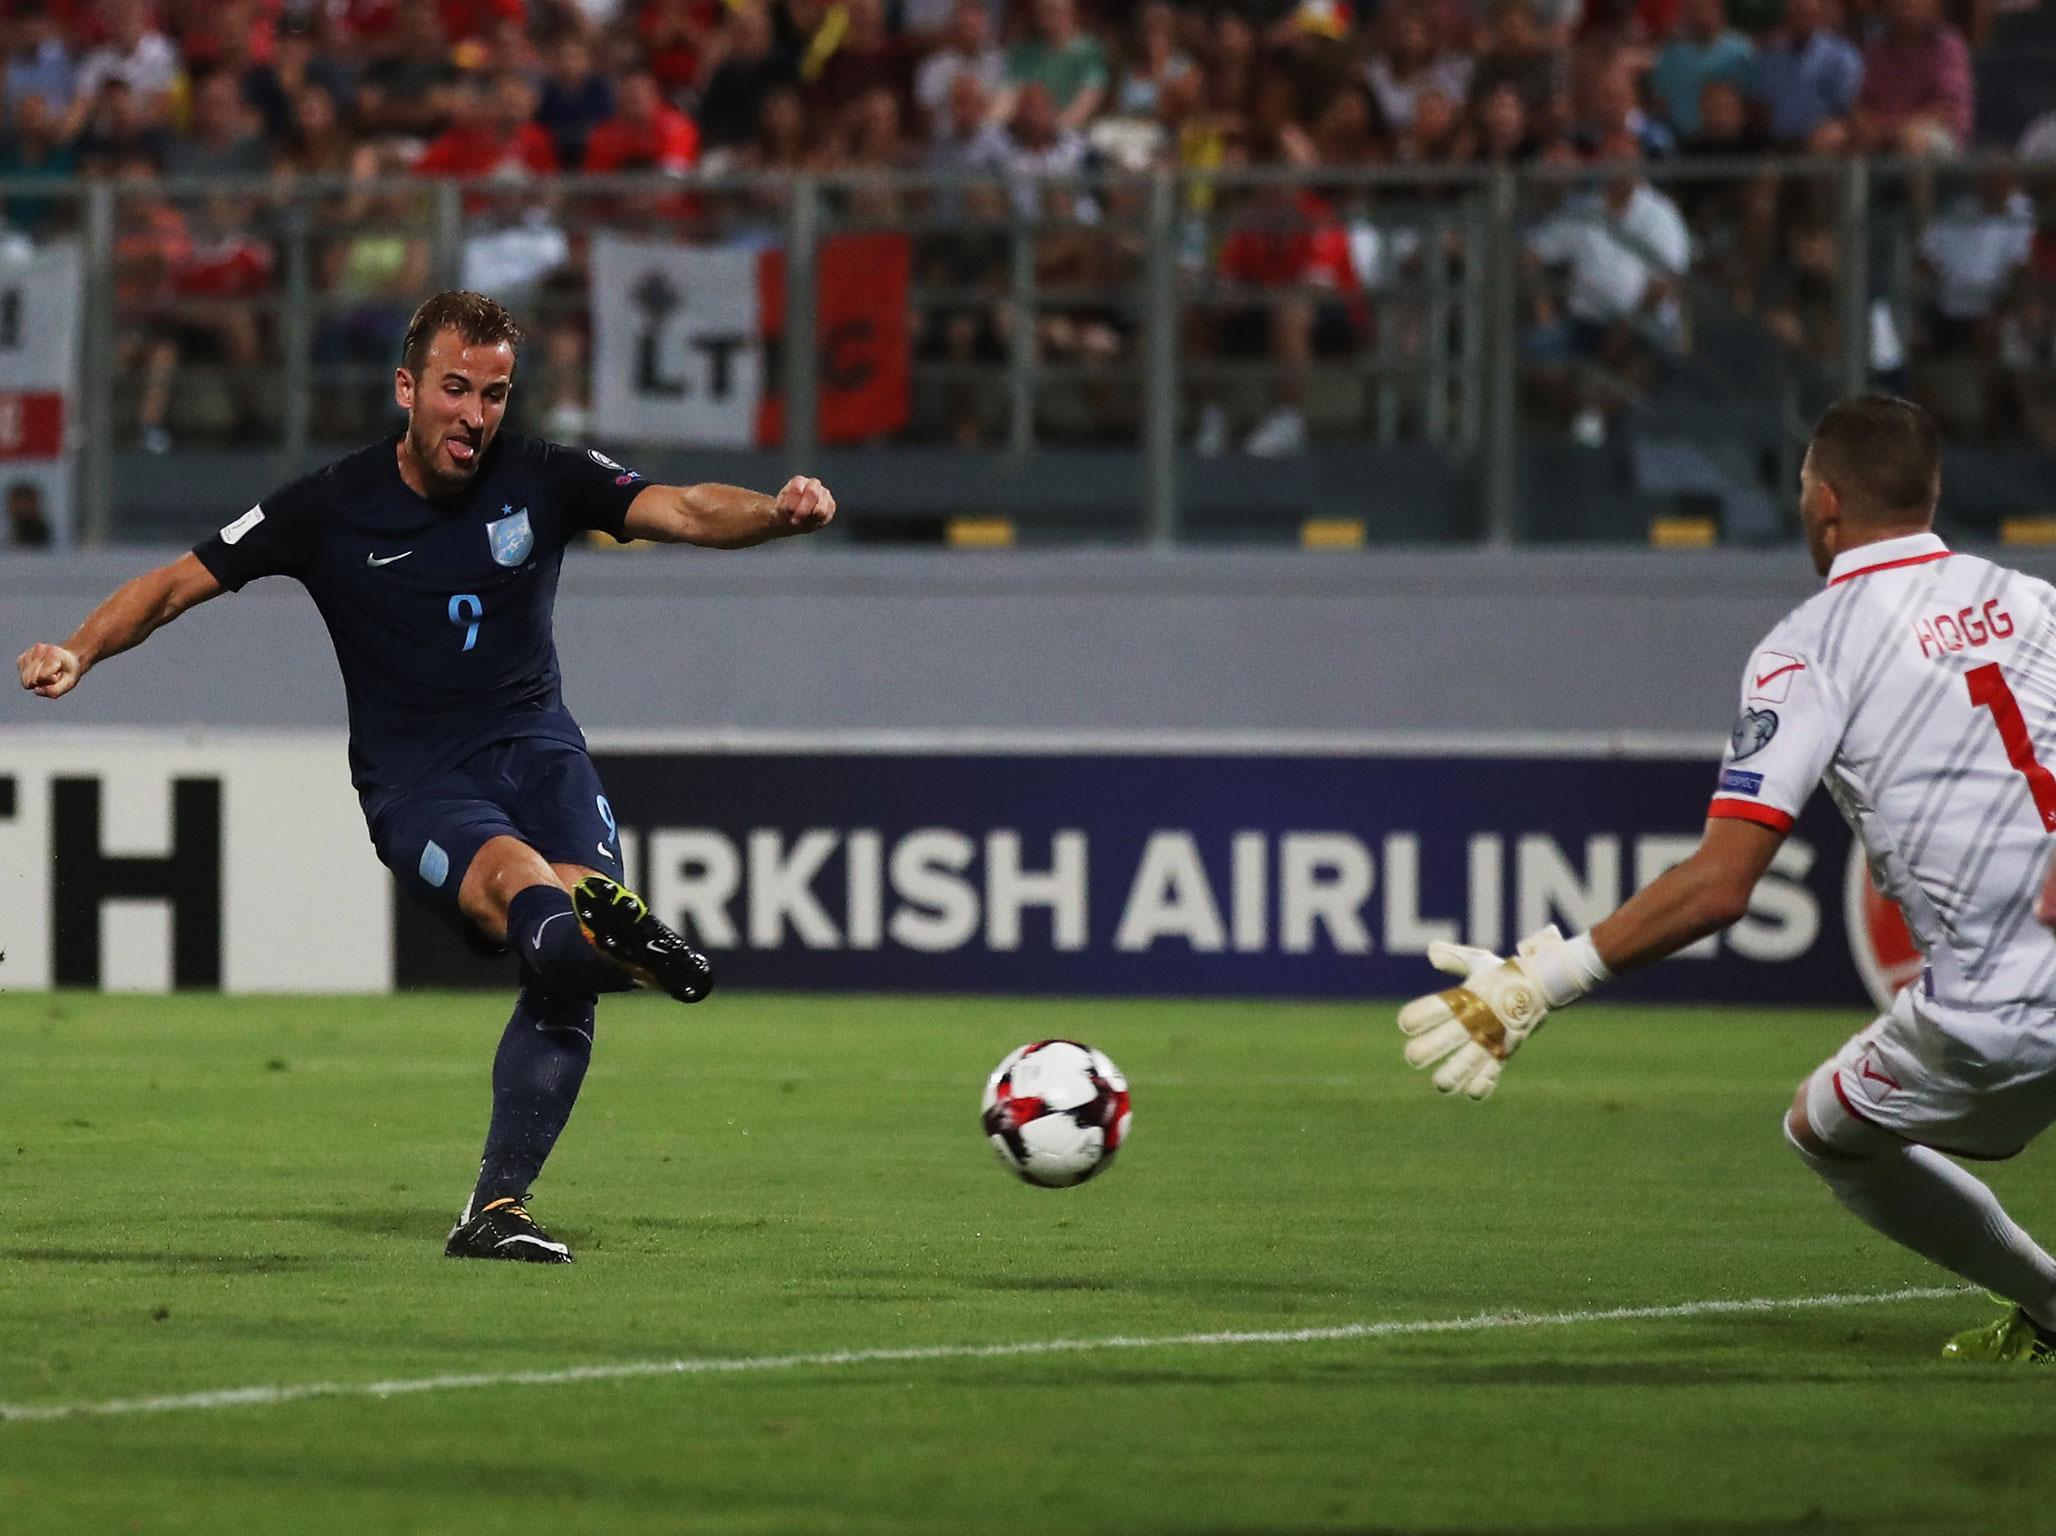 Gareth Southgate's men are looking for all three points in Malta